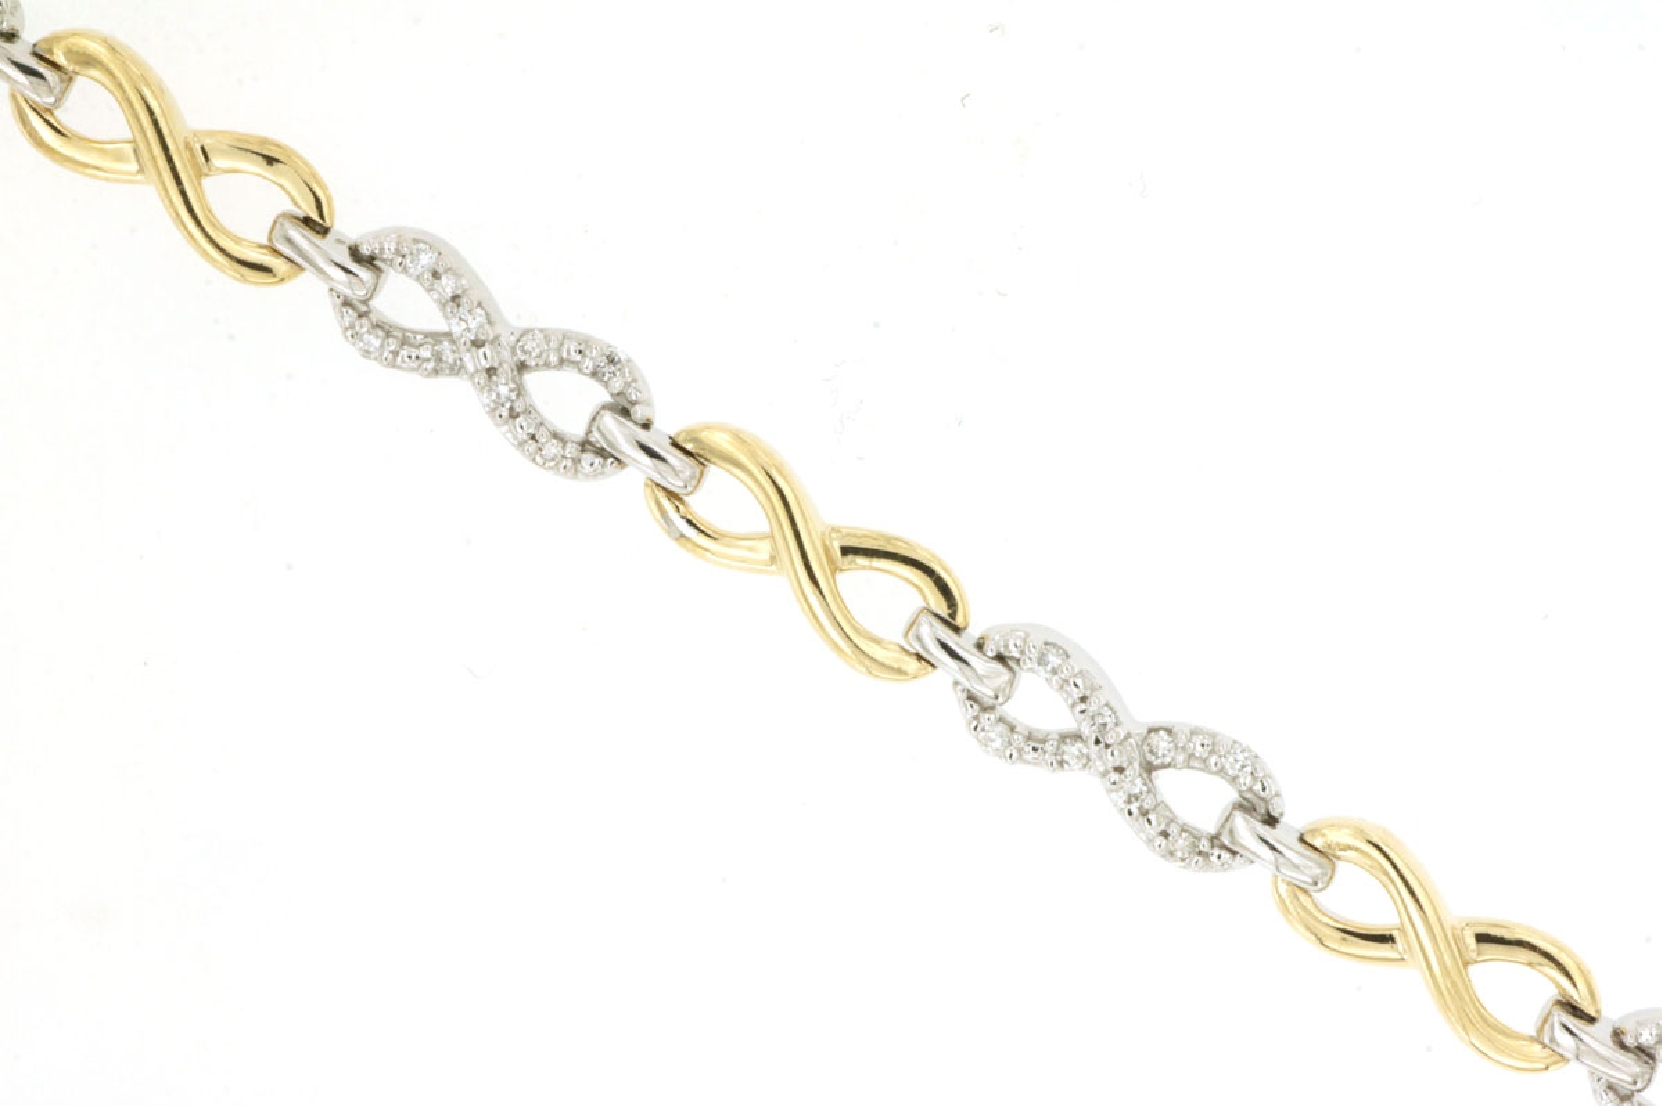 14K Two Tone Gold Infinity Link Bracelet with Diamond Accents and Lobster Clasp

7.5 Inch 
0.26cttw Diamonds